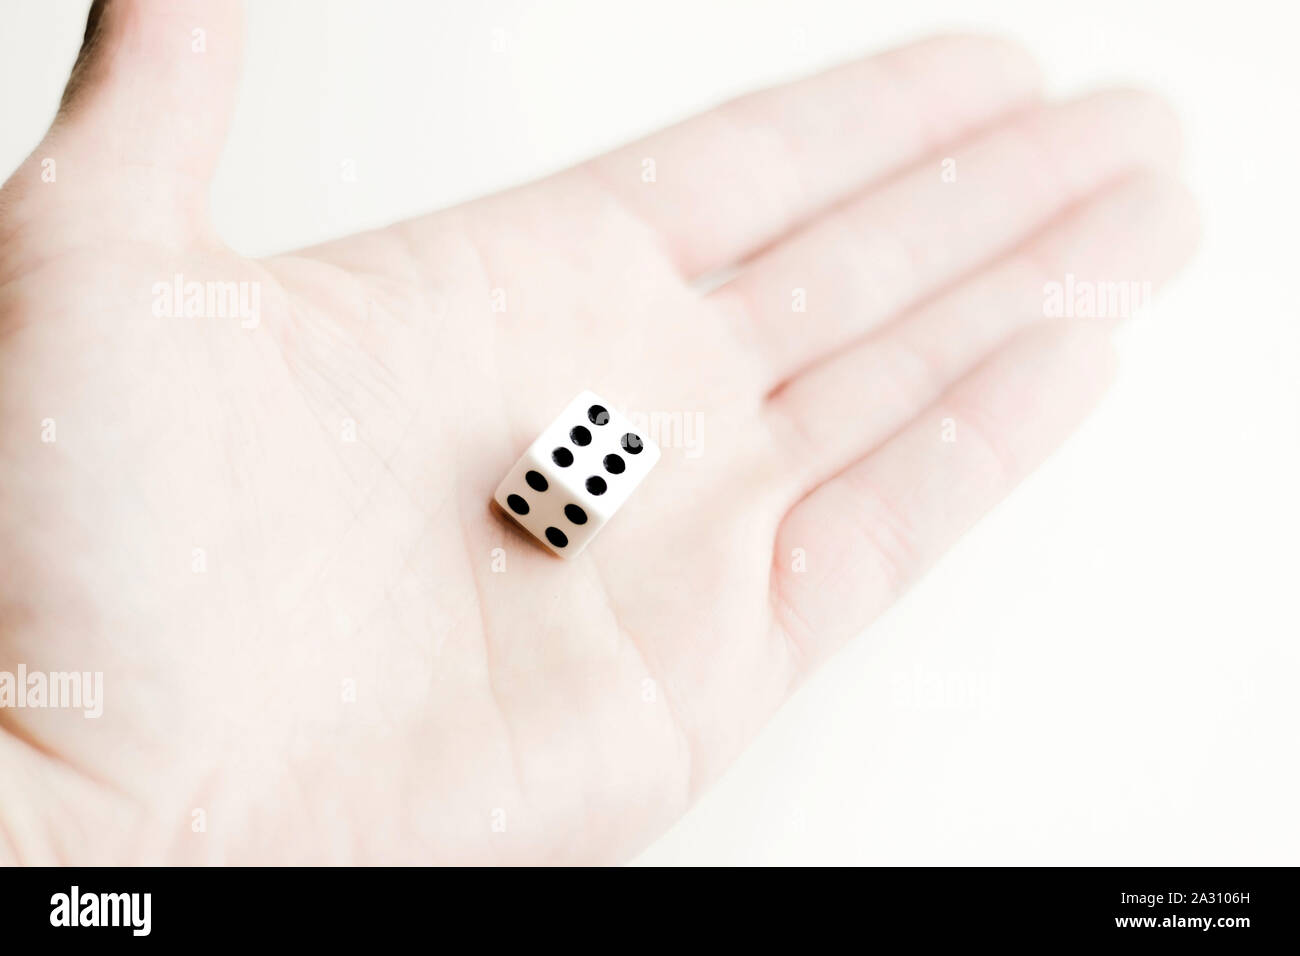 Game dice in a hand. Casino gambling. Stock Photo